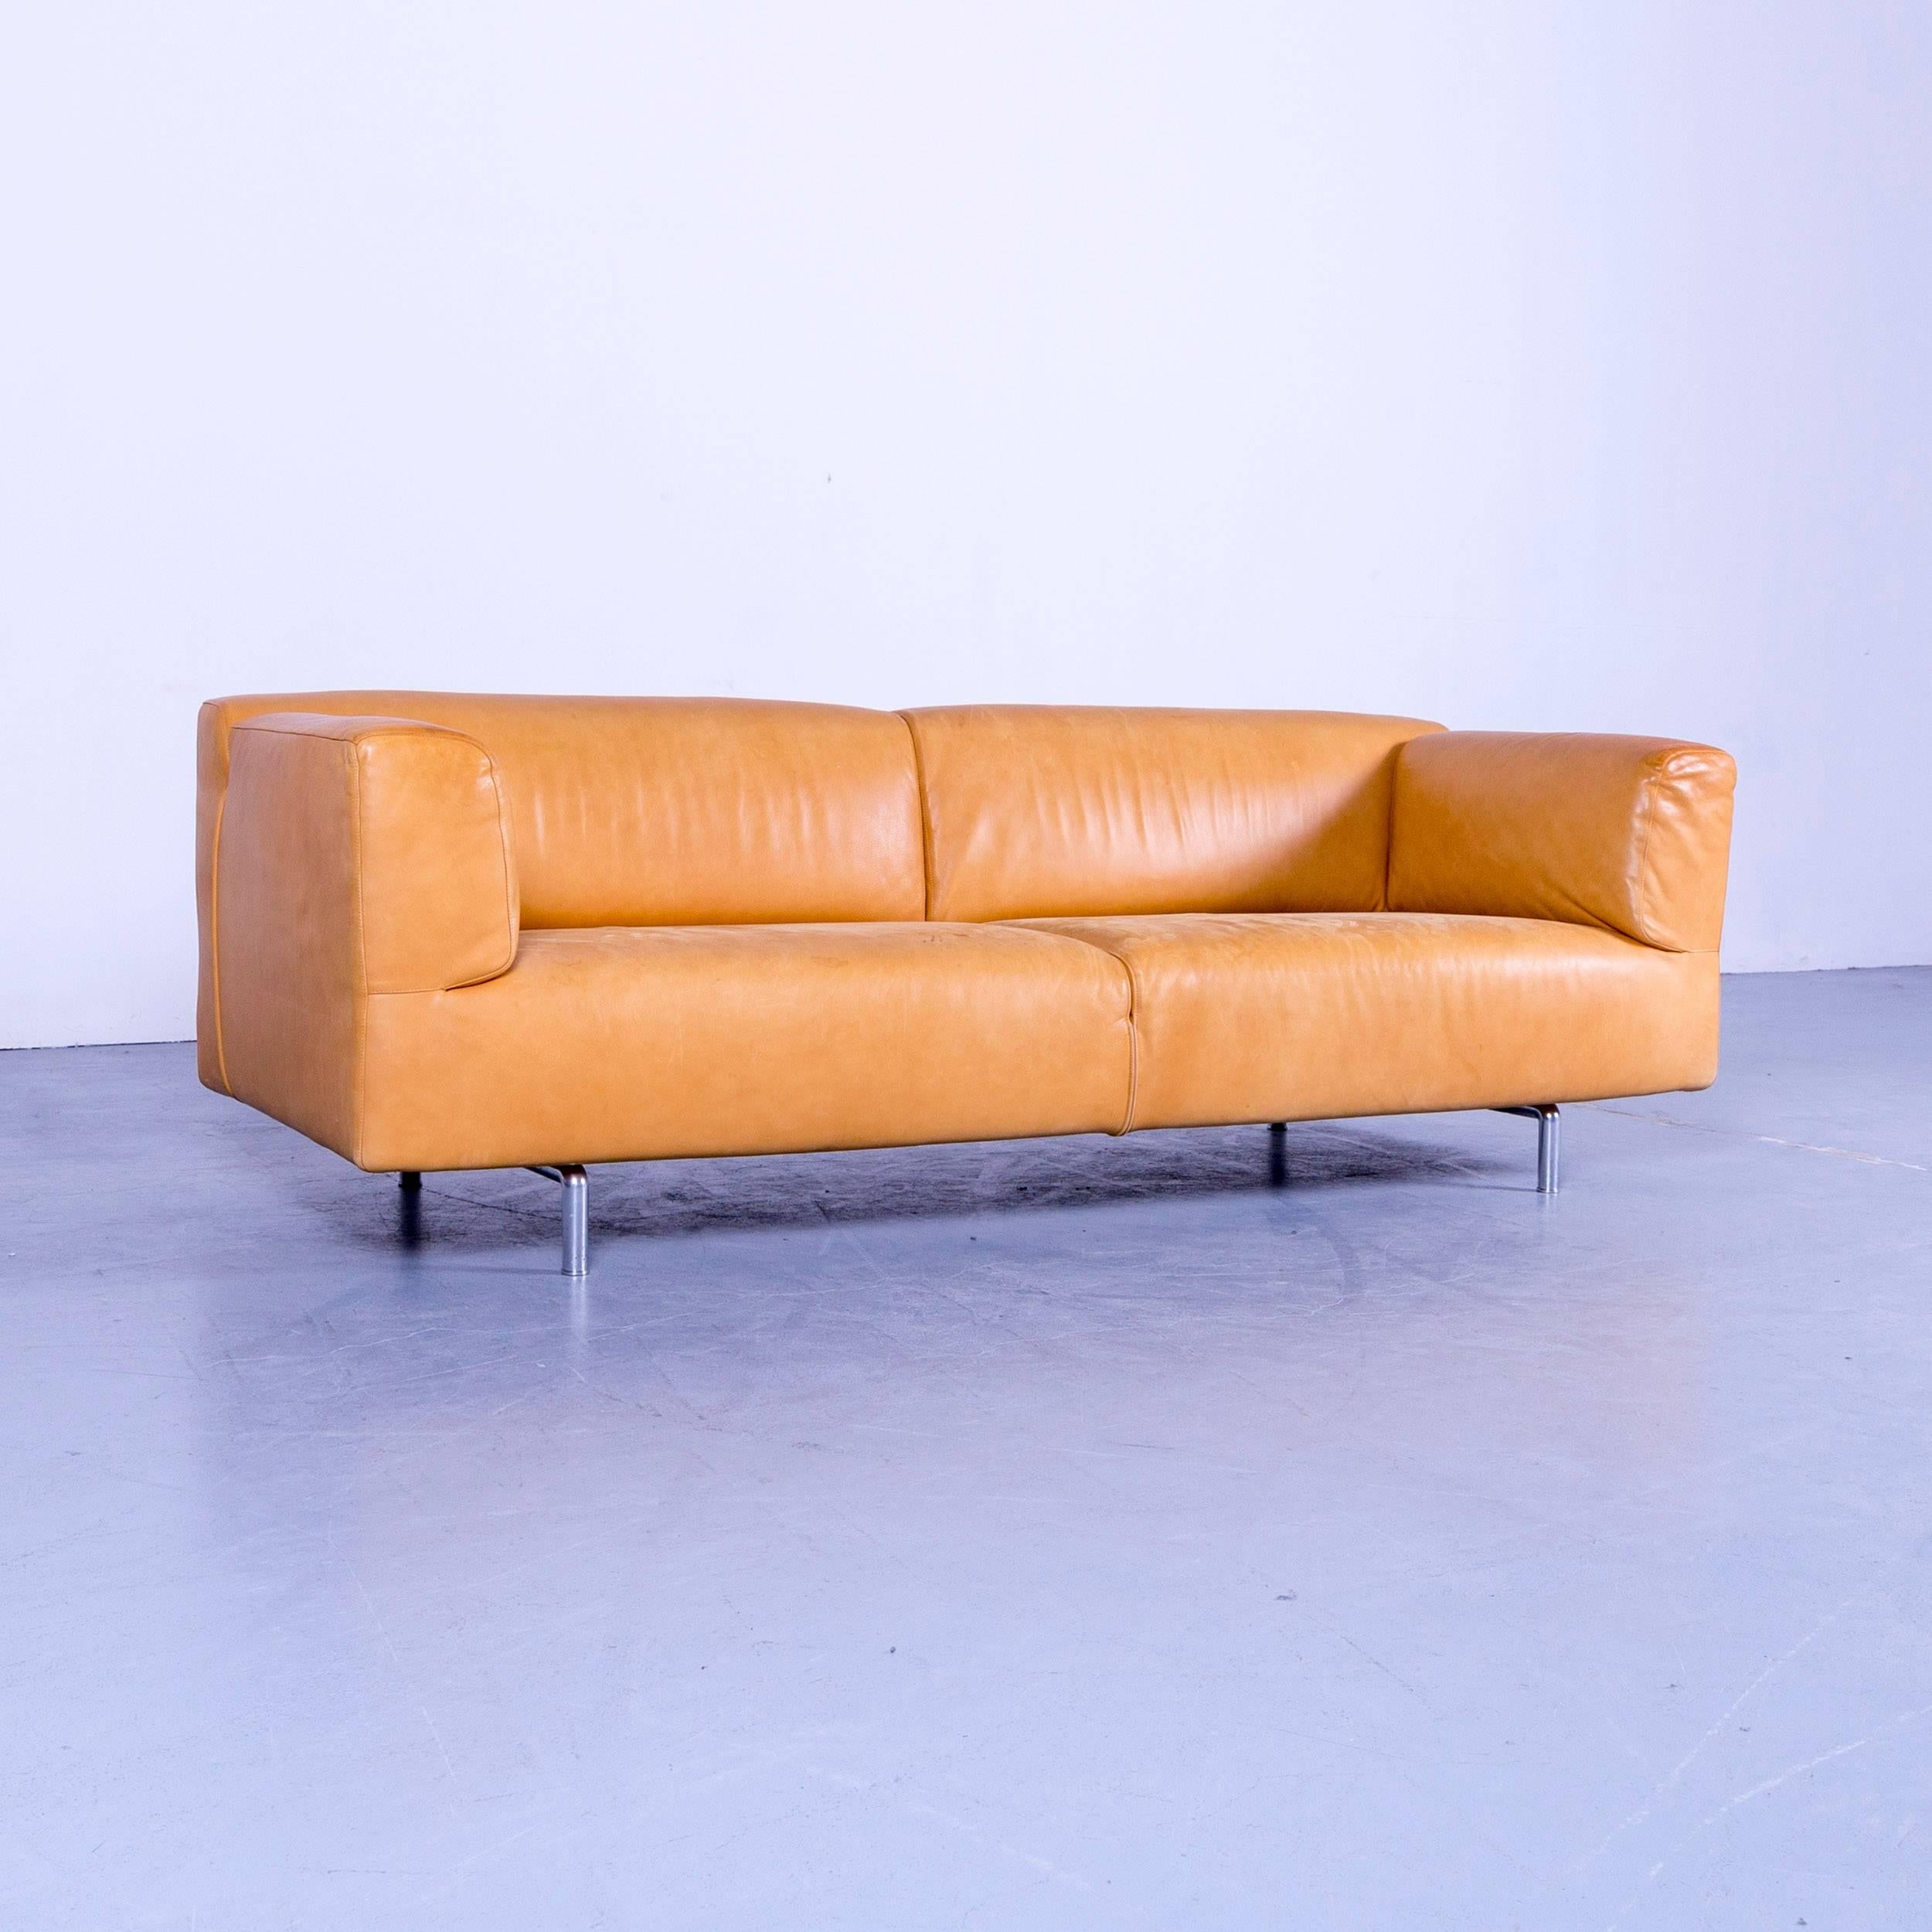 Brown colored original Cassina met designer sofa, in a minimalistic and modern design, made for pure comfort and style.